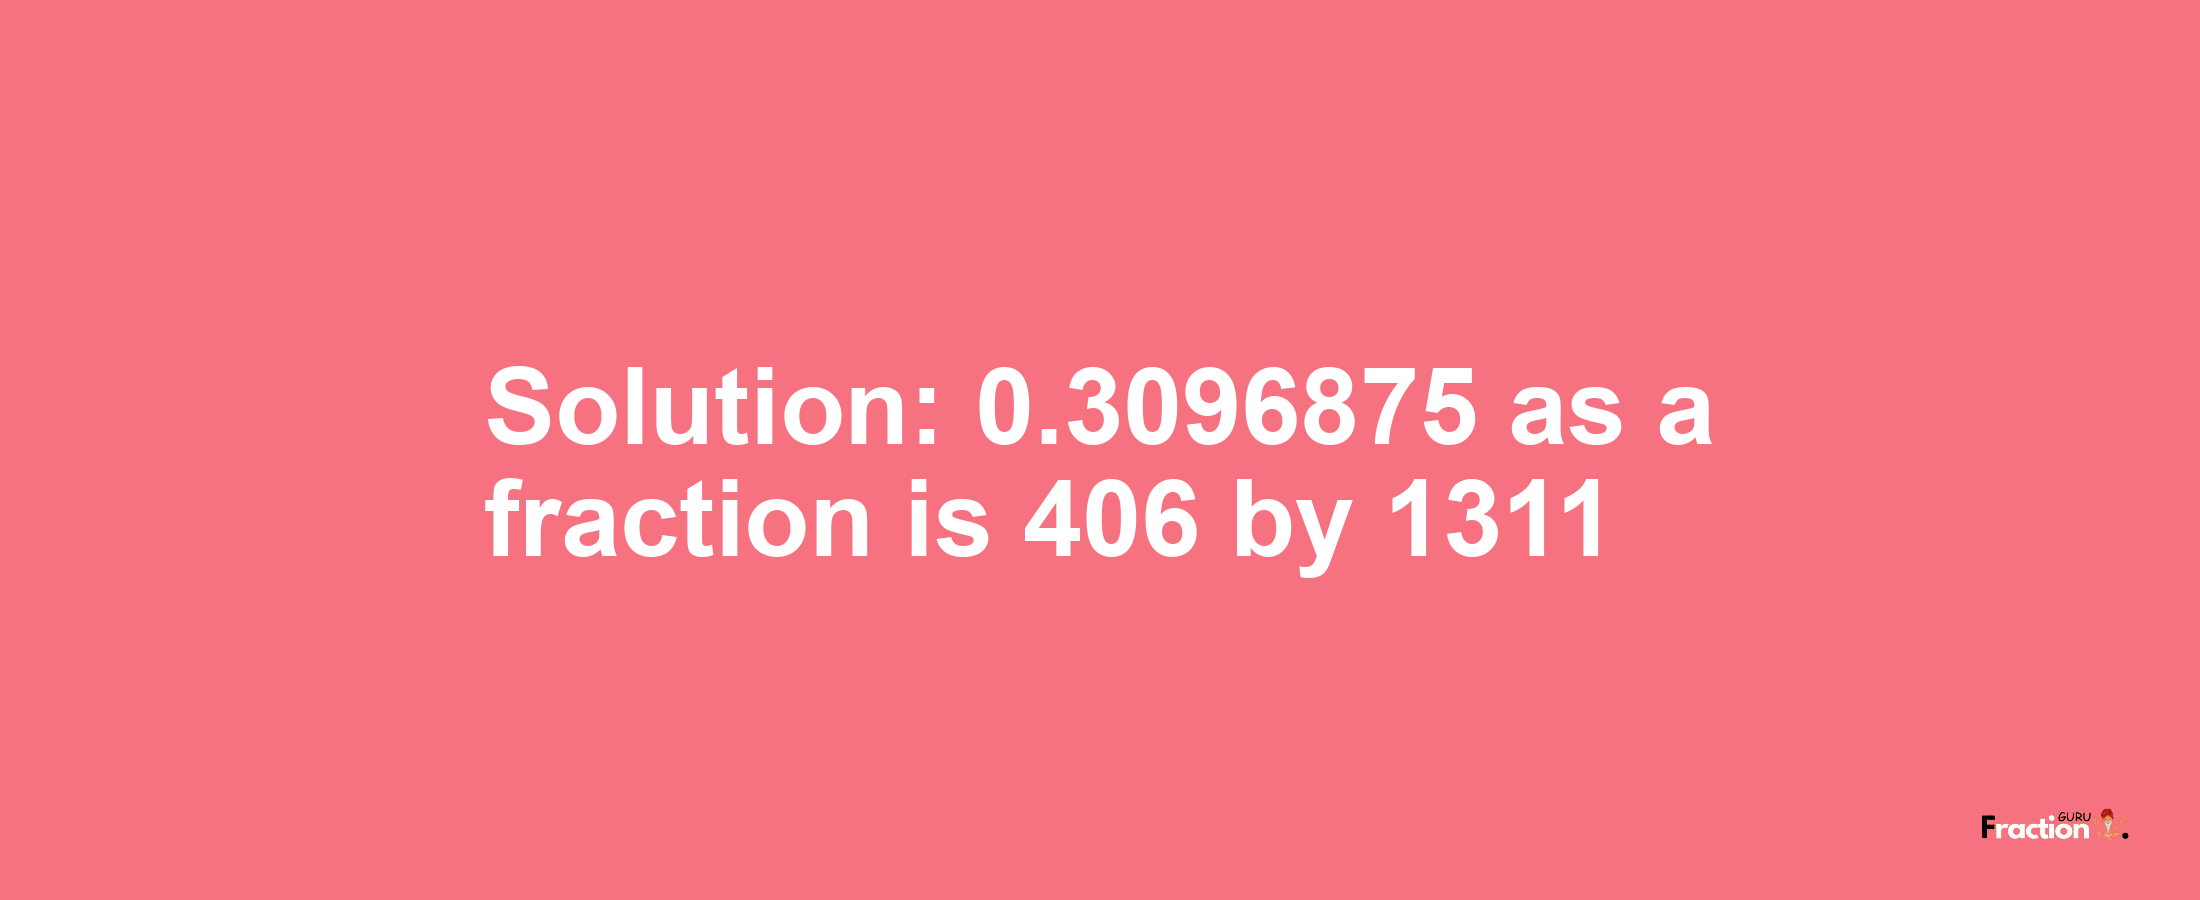 Solution:0.3096875 as a fraction is 406/1311